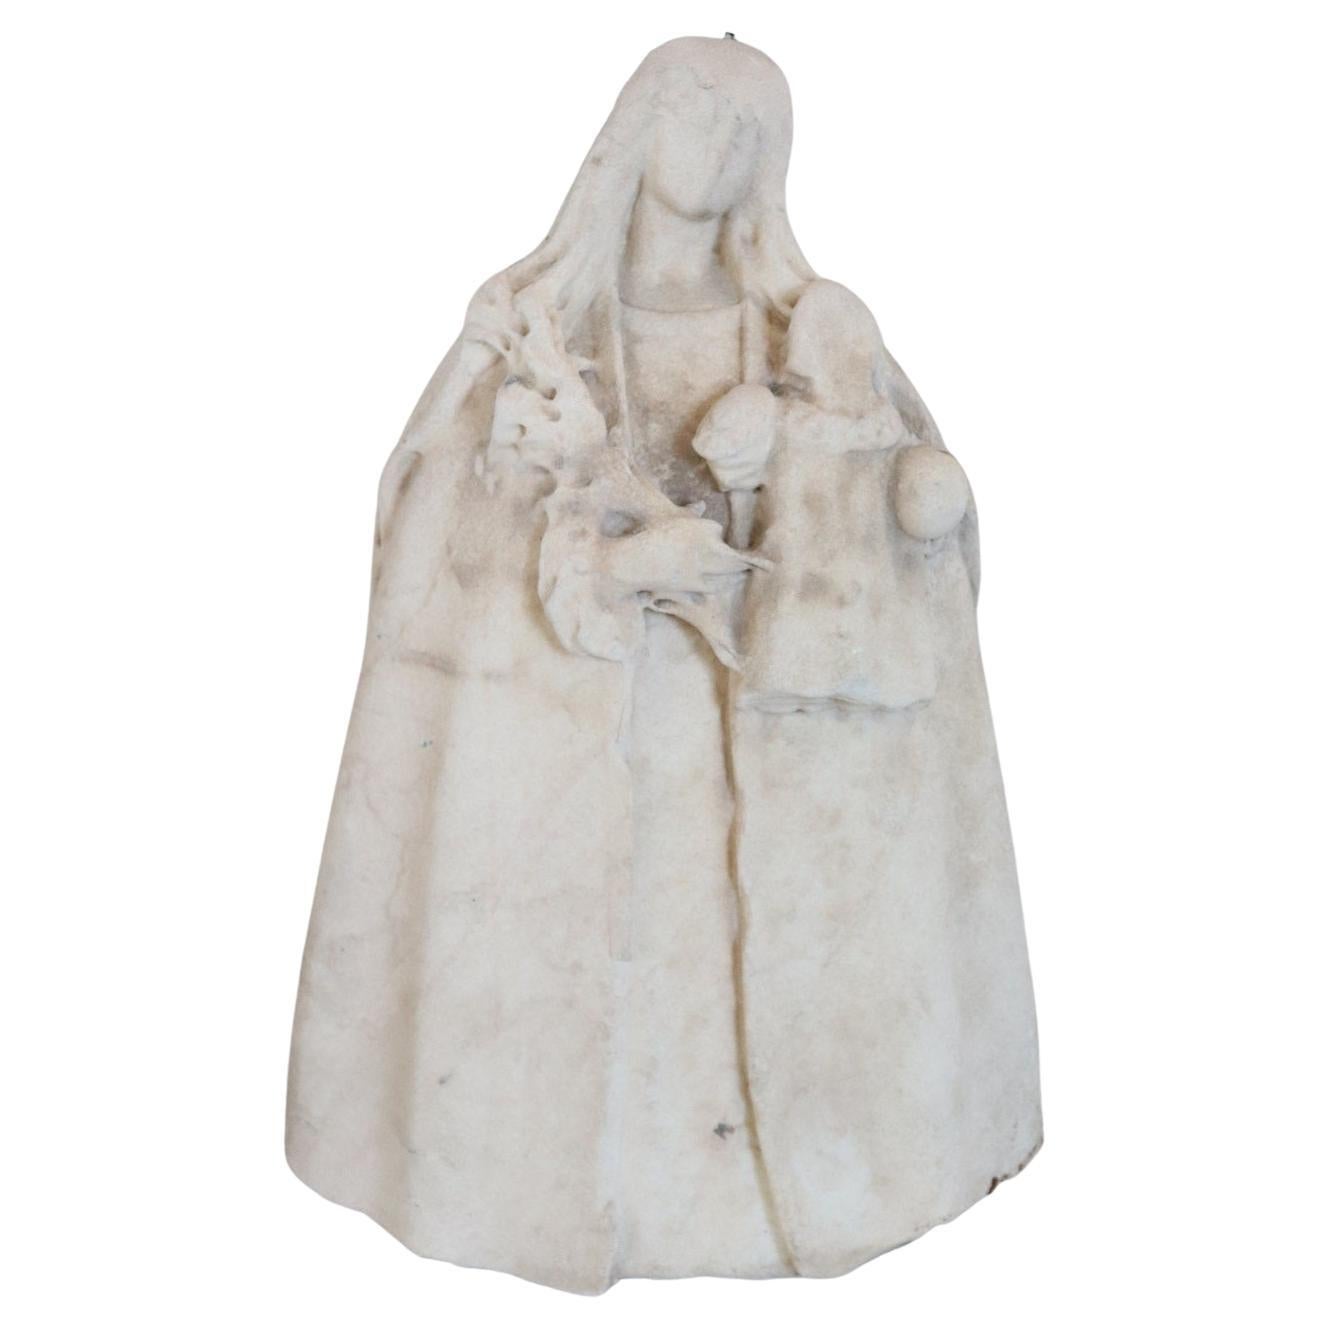 Rare 16th Century Sculpture in Precious White Marble of Carrara, Mary with Child For Sale